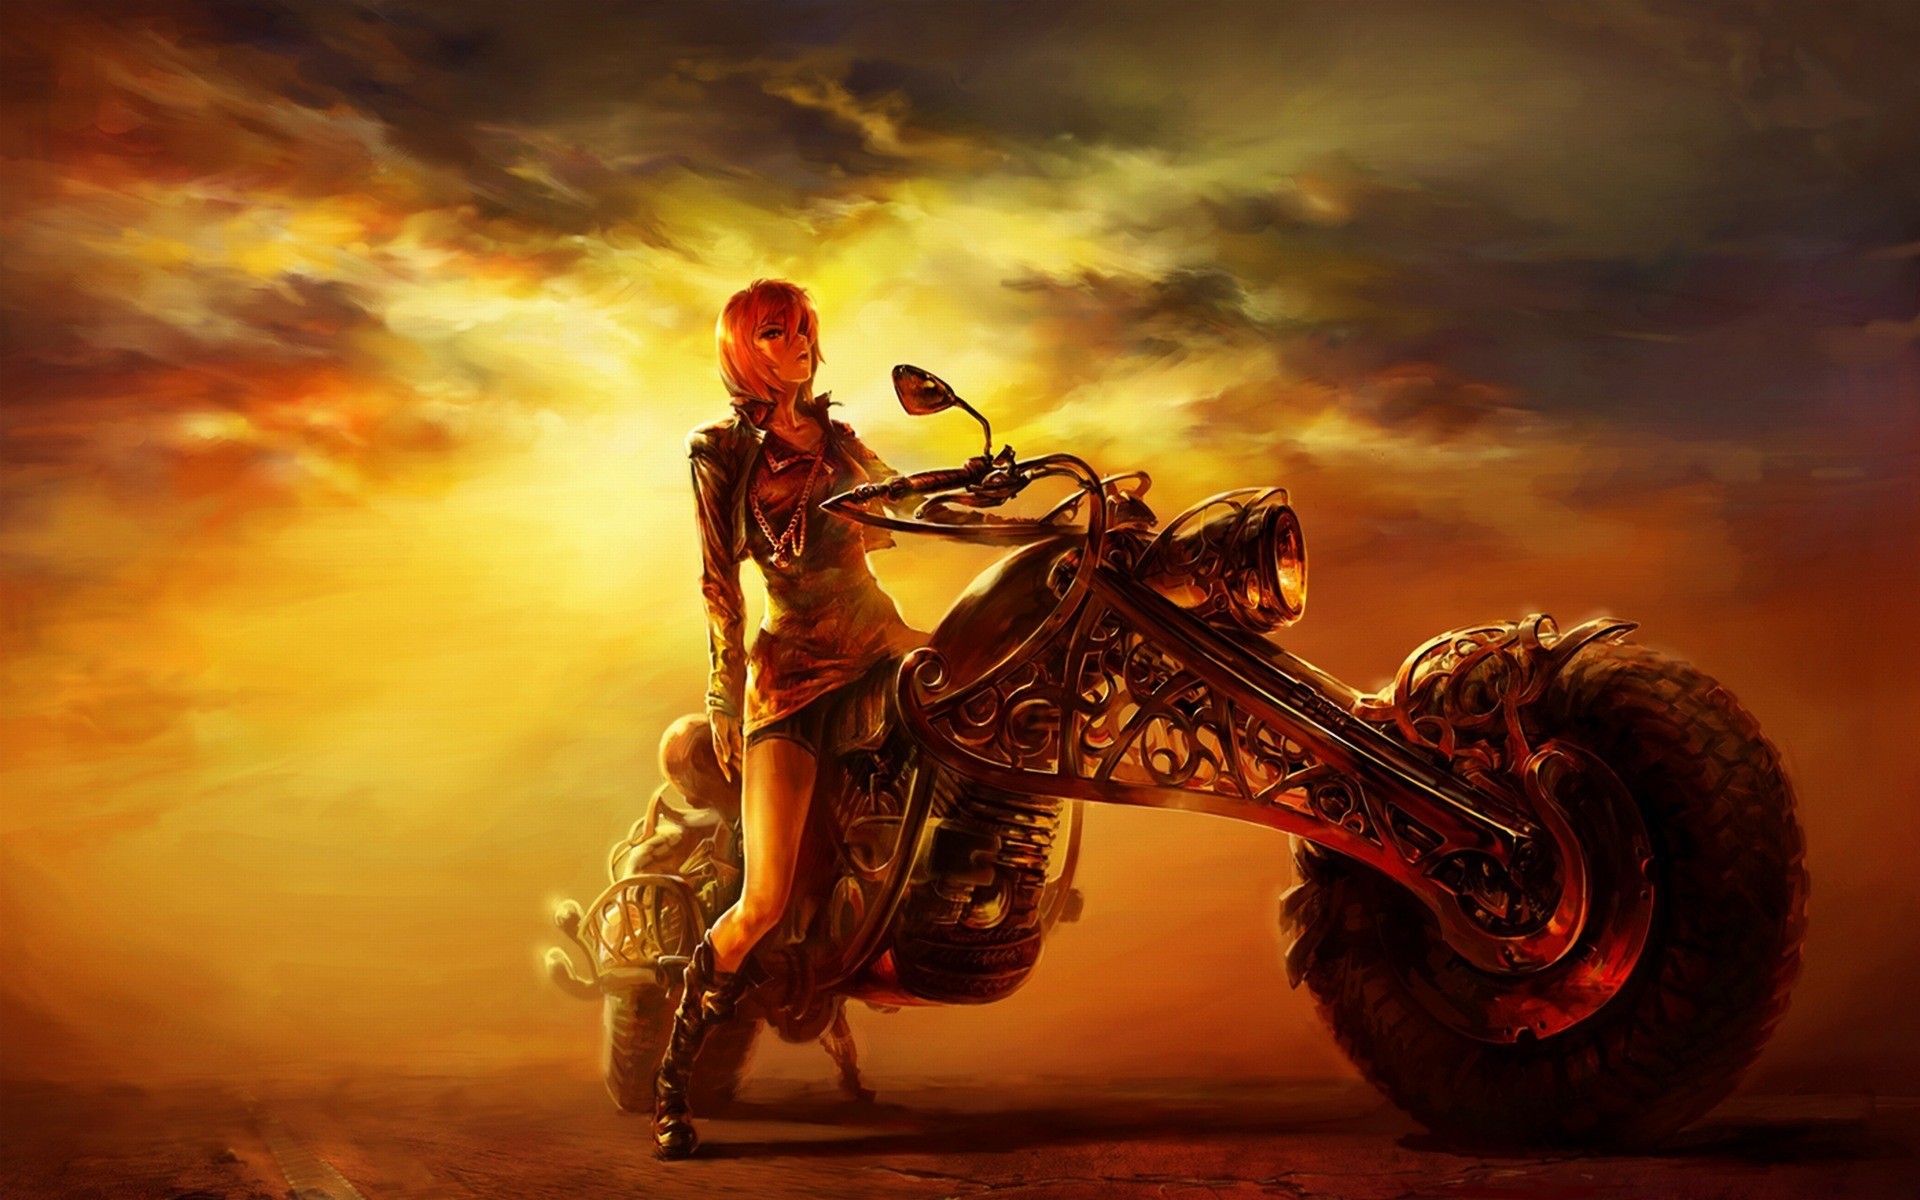 Fantasy girl, bike, 3D, Photomanipulation, Photoshop Full HD wallpaper  download to PC, Mobile or Table PC. You can also set as Facebook Cover